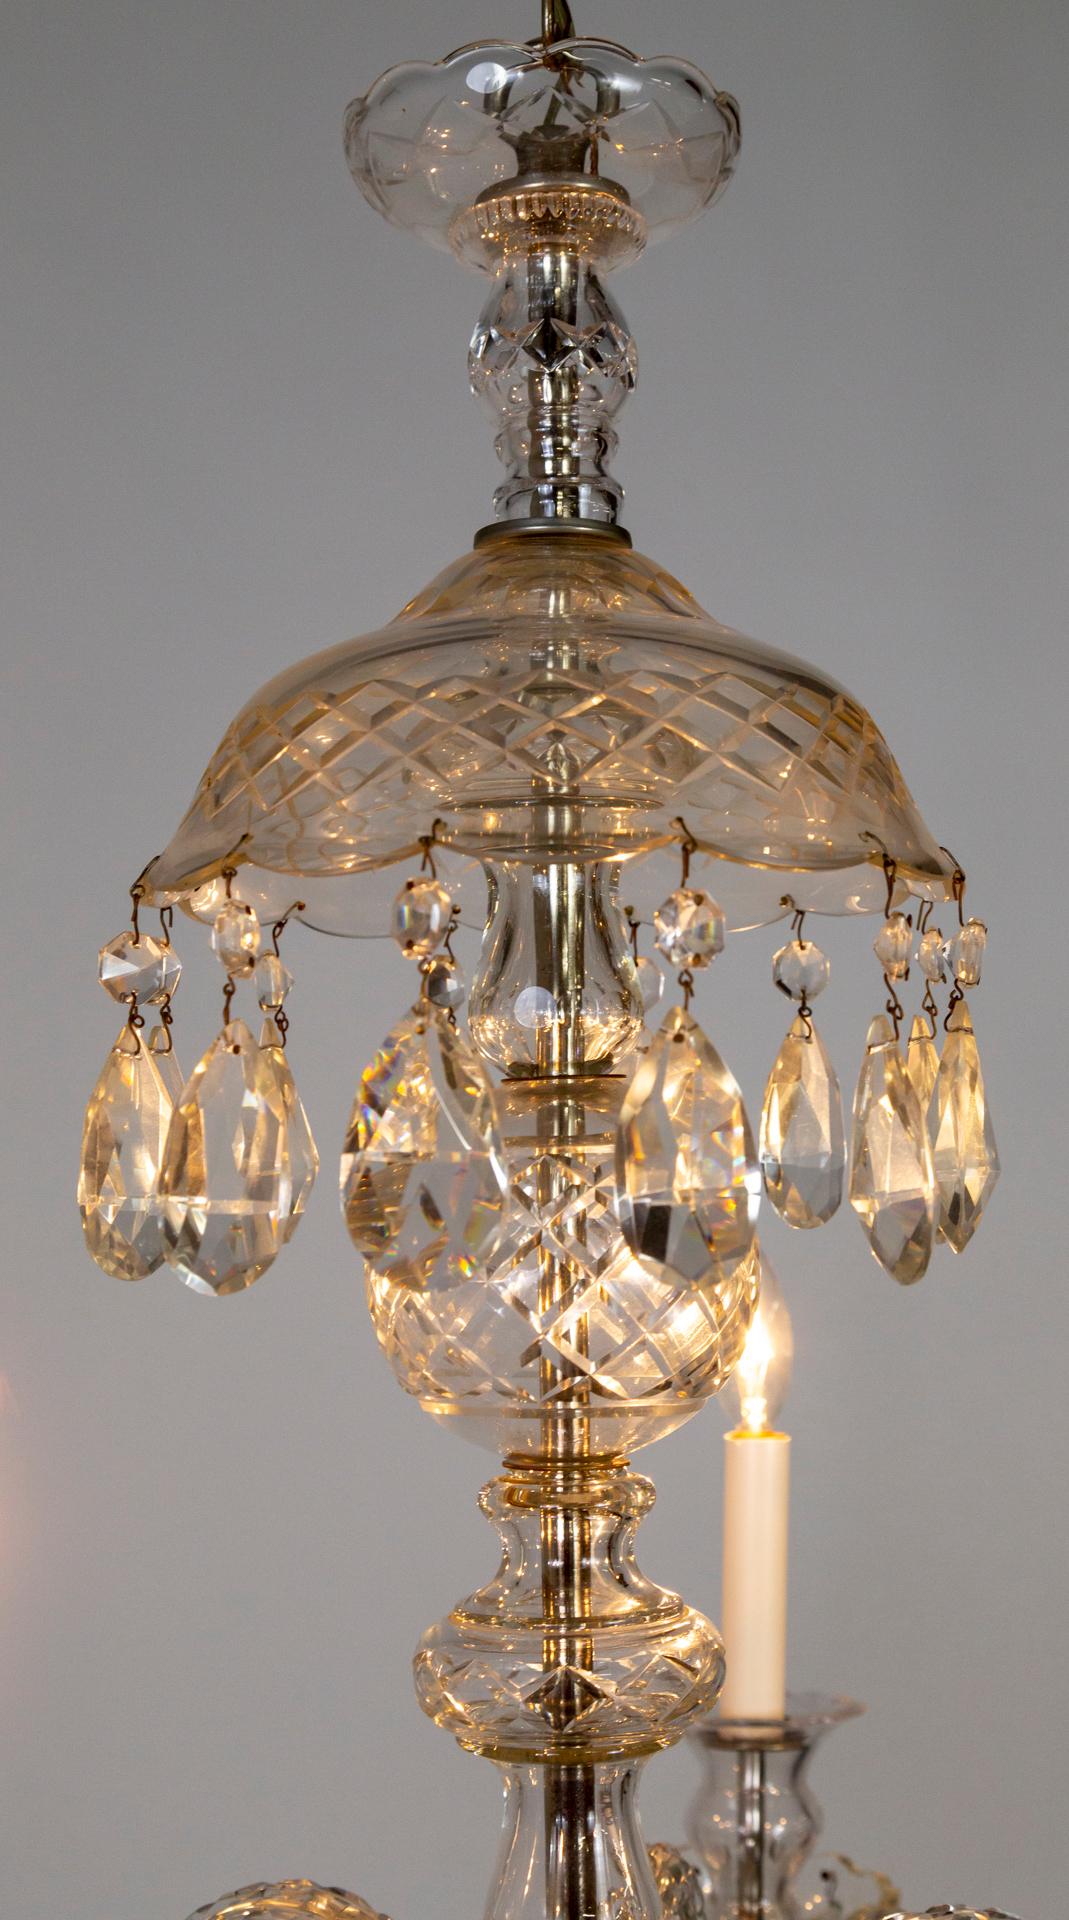 A chandelier with six finely-cut crystal, S-curve arms, molded and cut crystal candle cups, bobeches, mounts, and body. With crystal garlands, large pendaloques, and crowned with a large reverse-dish with dangling crystals. With chrome hardware.